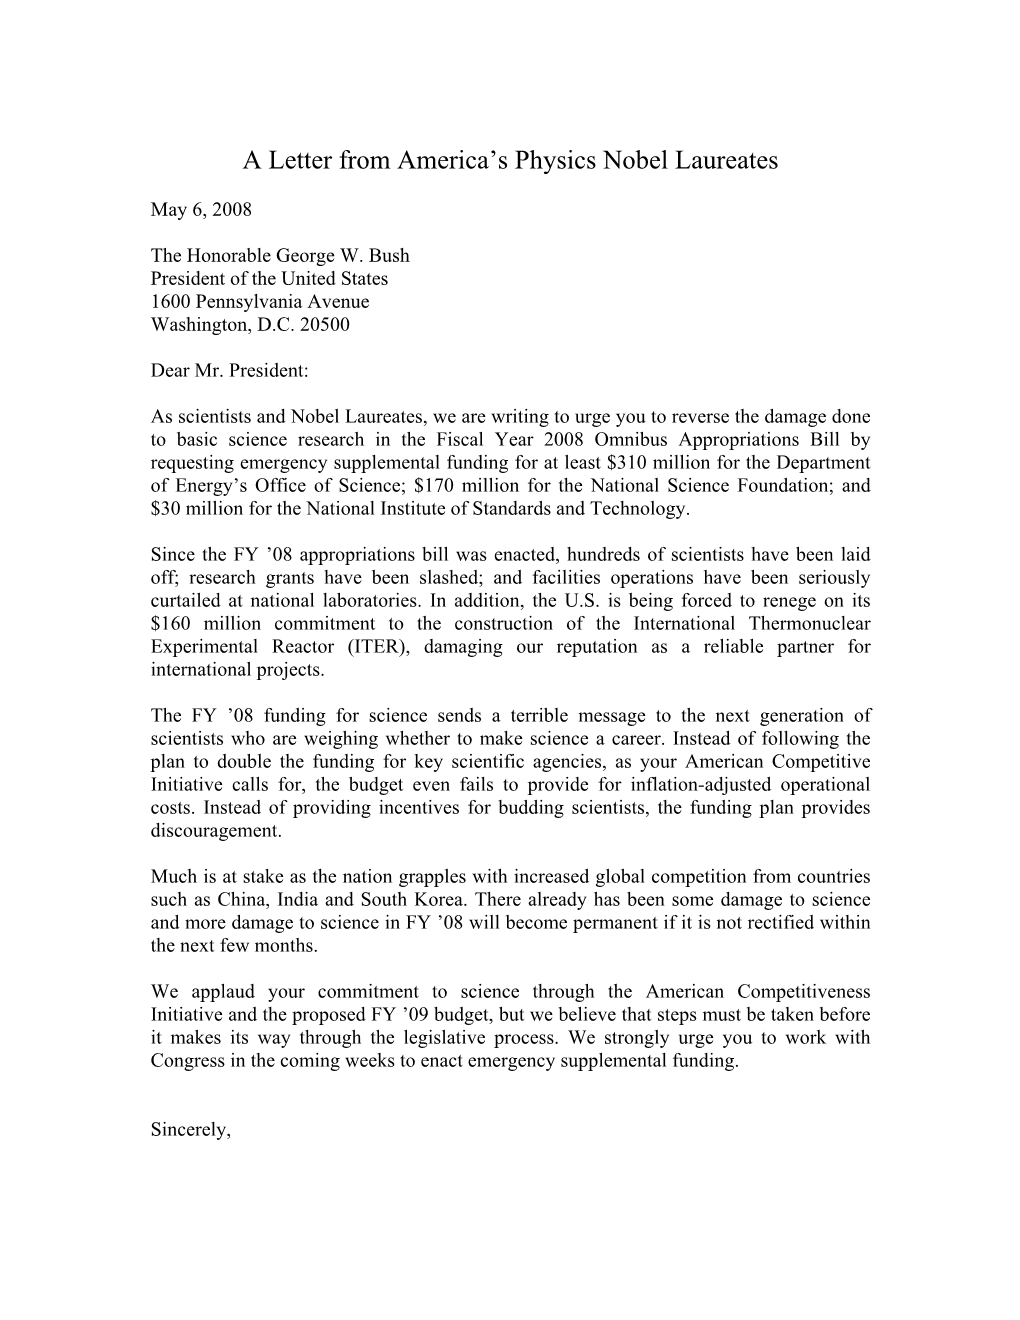 A Letter from America's Physics Nobel Laureates